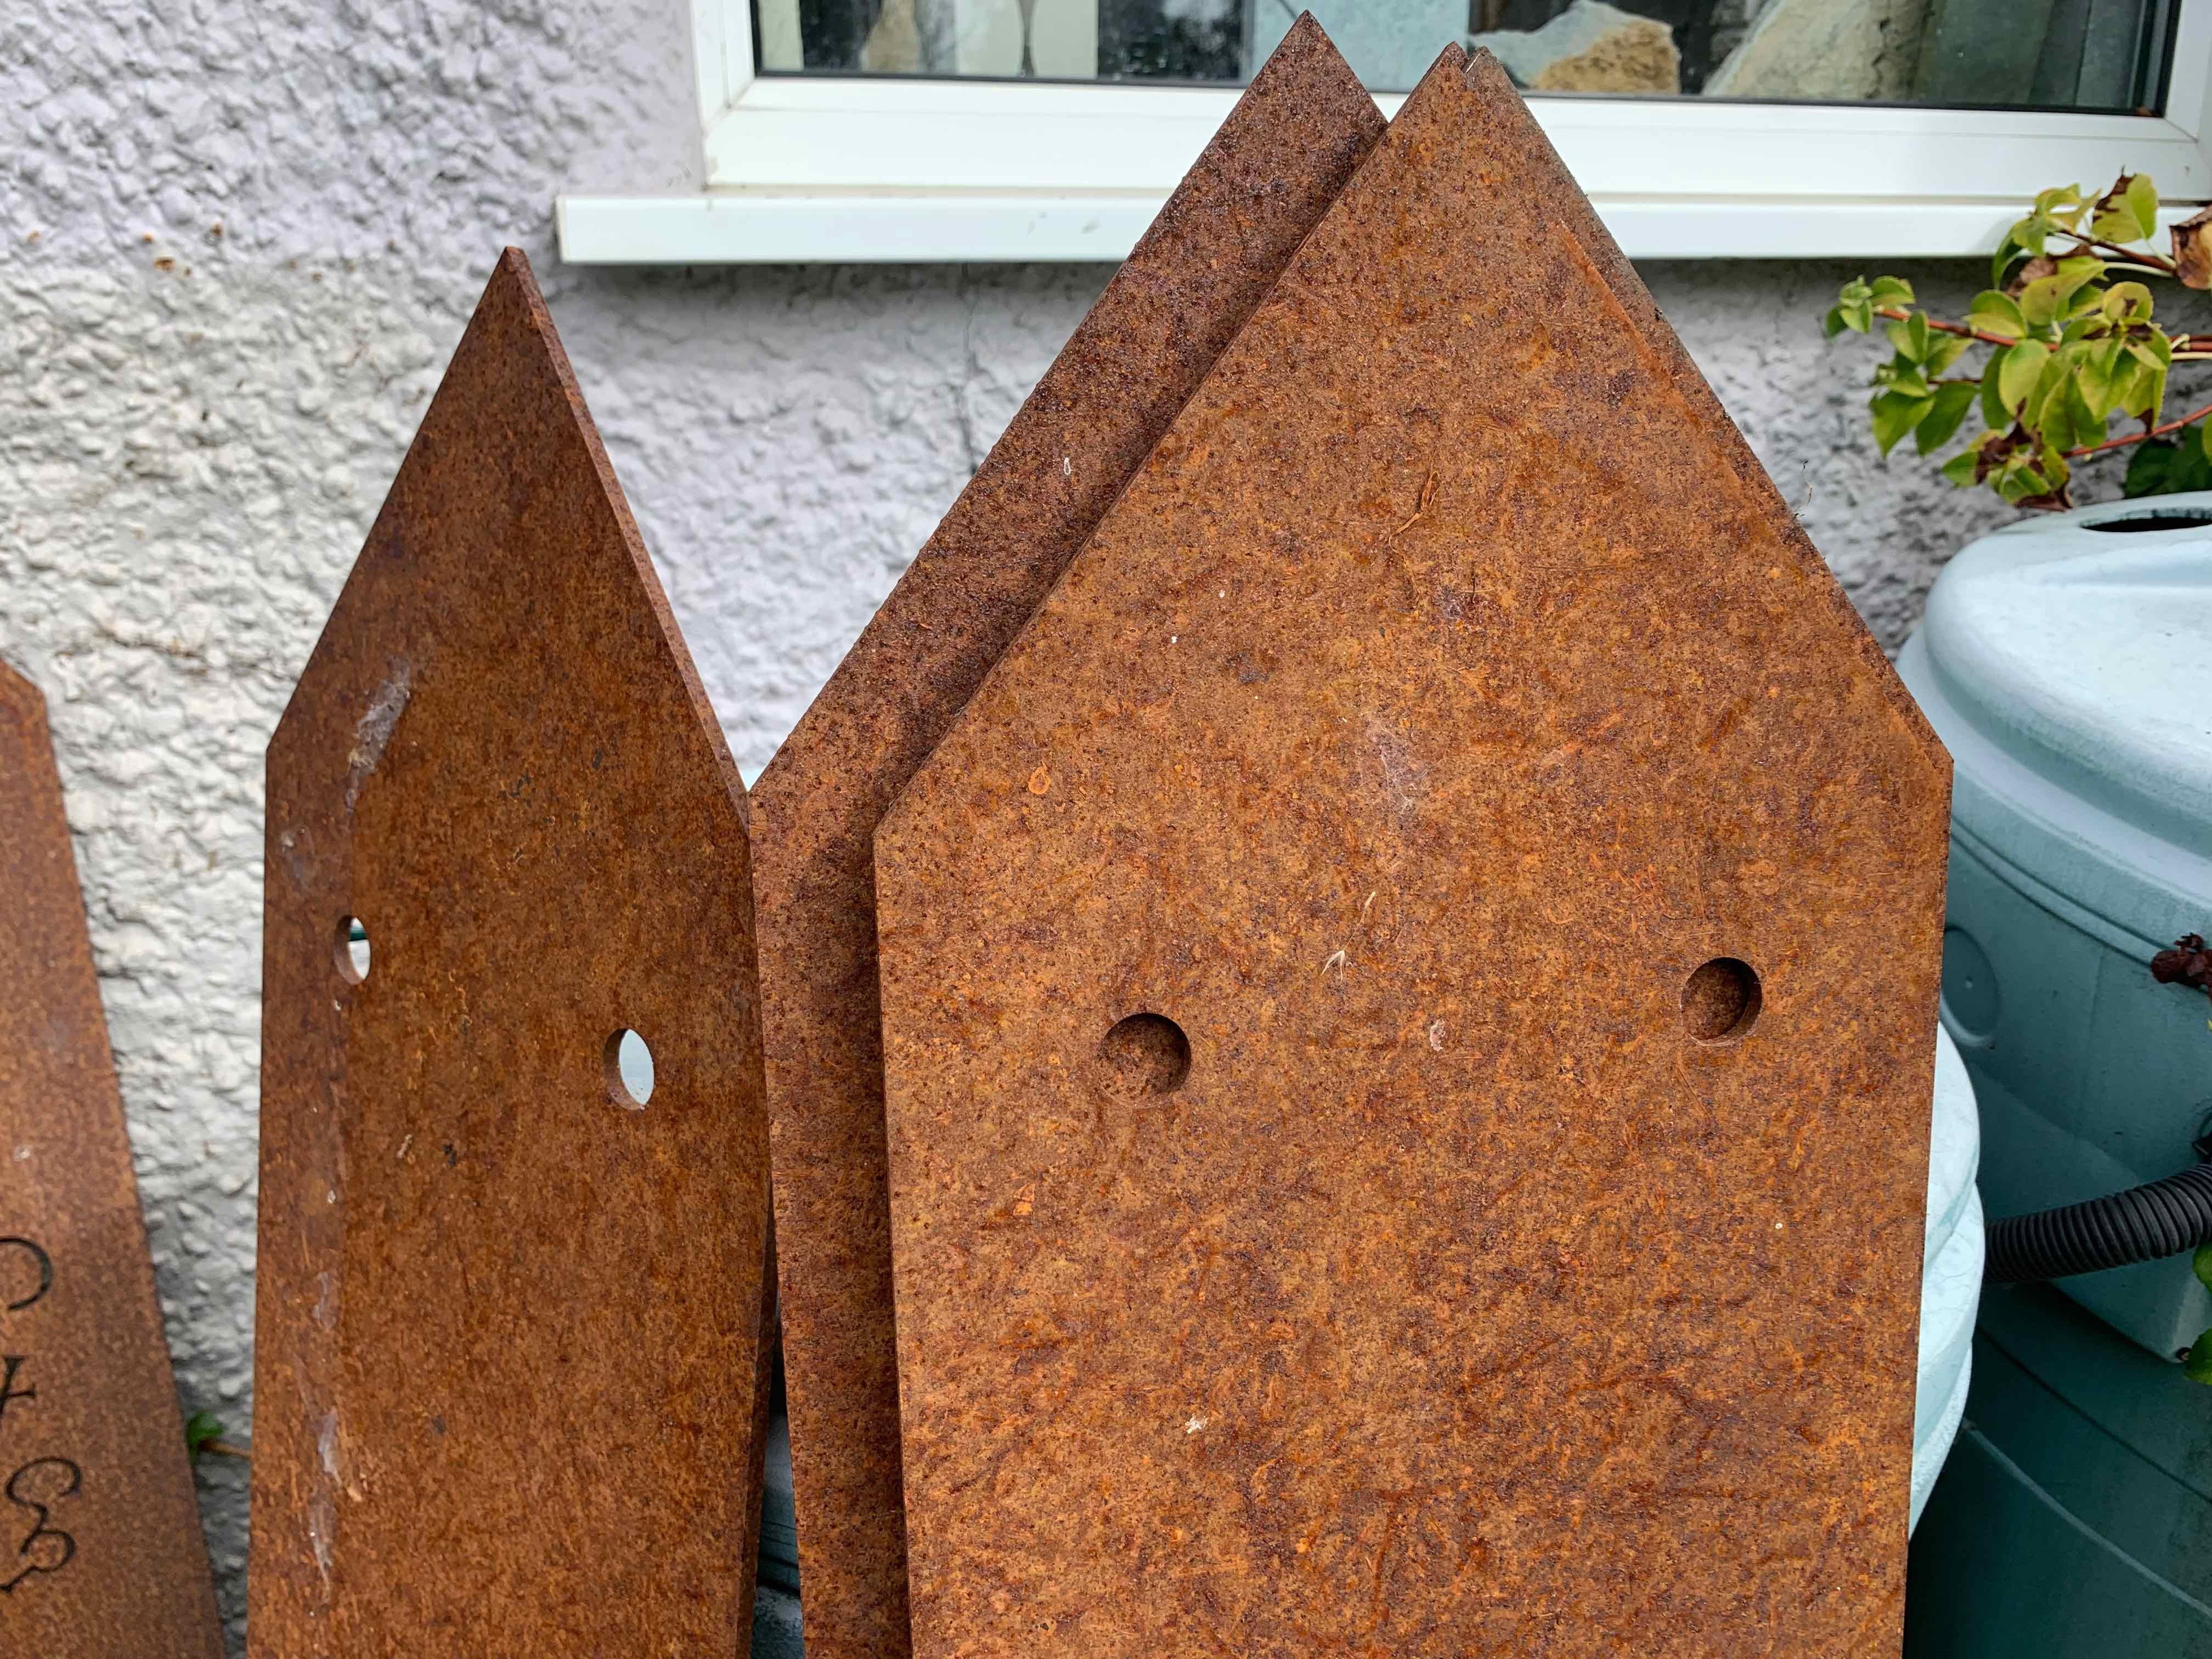 Apples, Editioned, Rusted Corten Steel Garden Sculpture by Annet Stirling For Sale 4